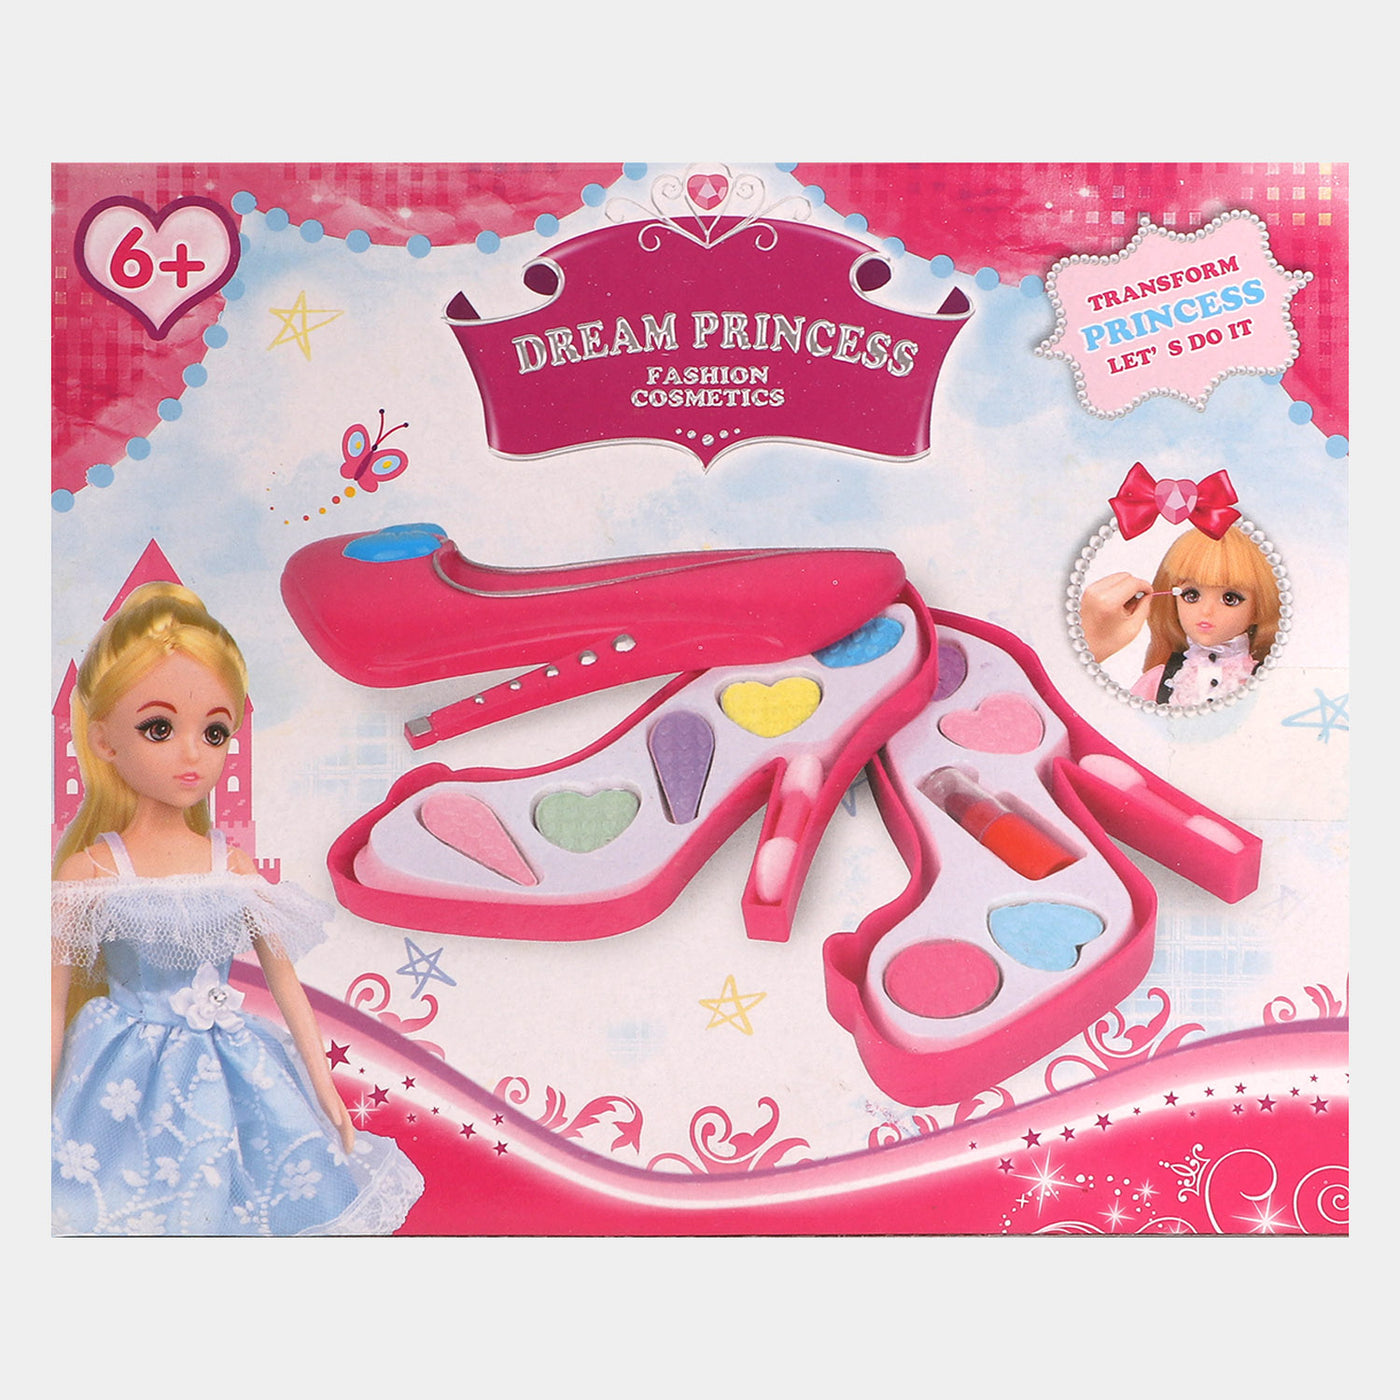 Dream Princess Fashion Cosmetic Toy Set For Girls